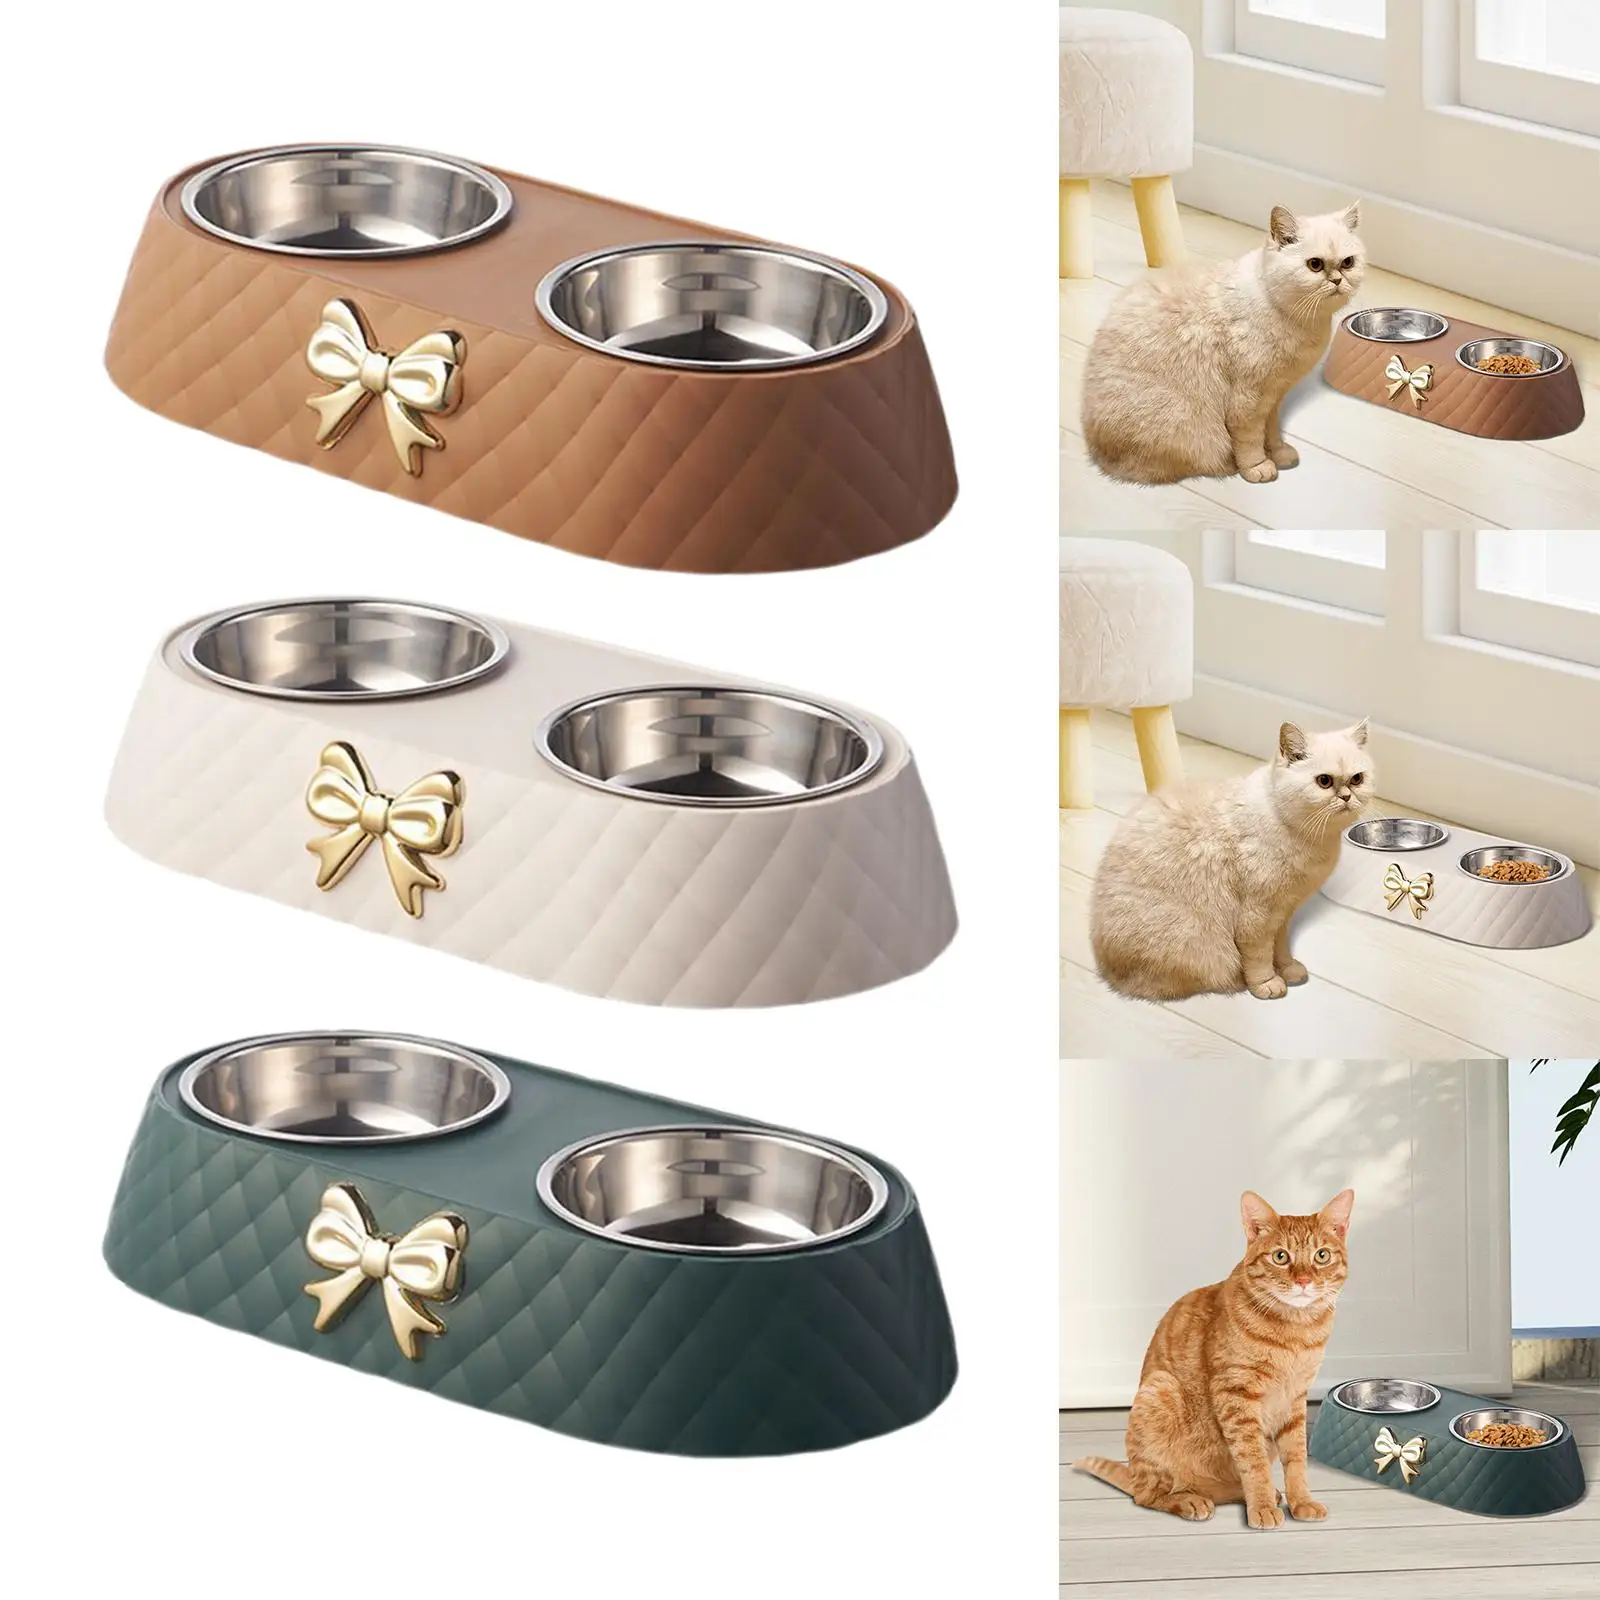 2 in 1 Dog Cat Bowls Stainless Steel Food Bowl Anti Skid Base Measure 13x6.9x2.6inches Food Water Feeder Accessory Portable